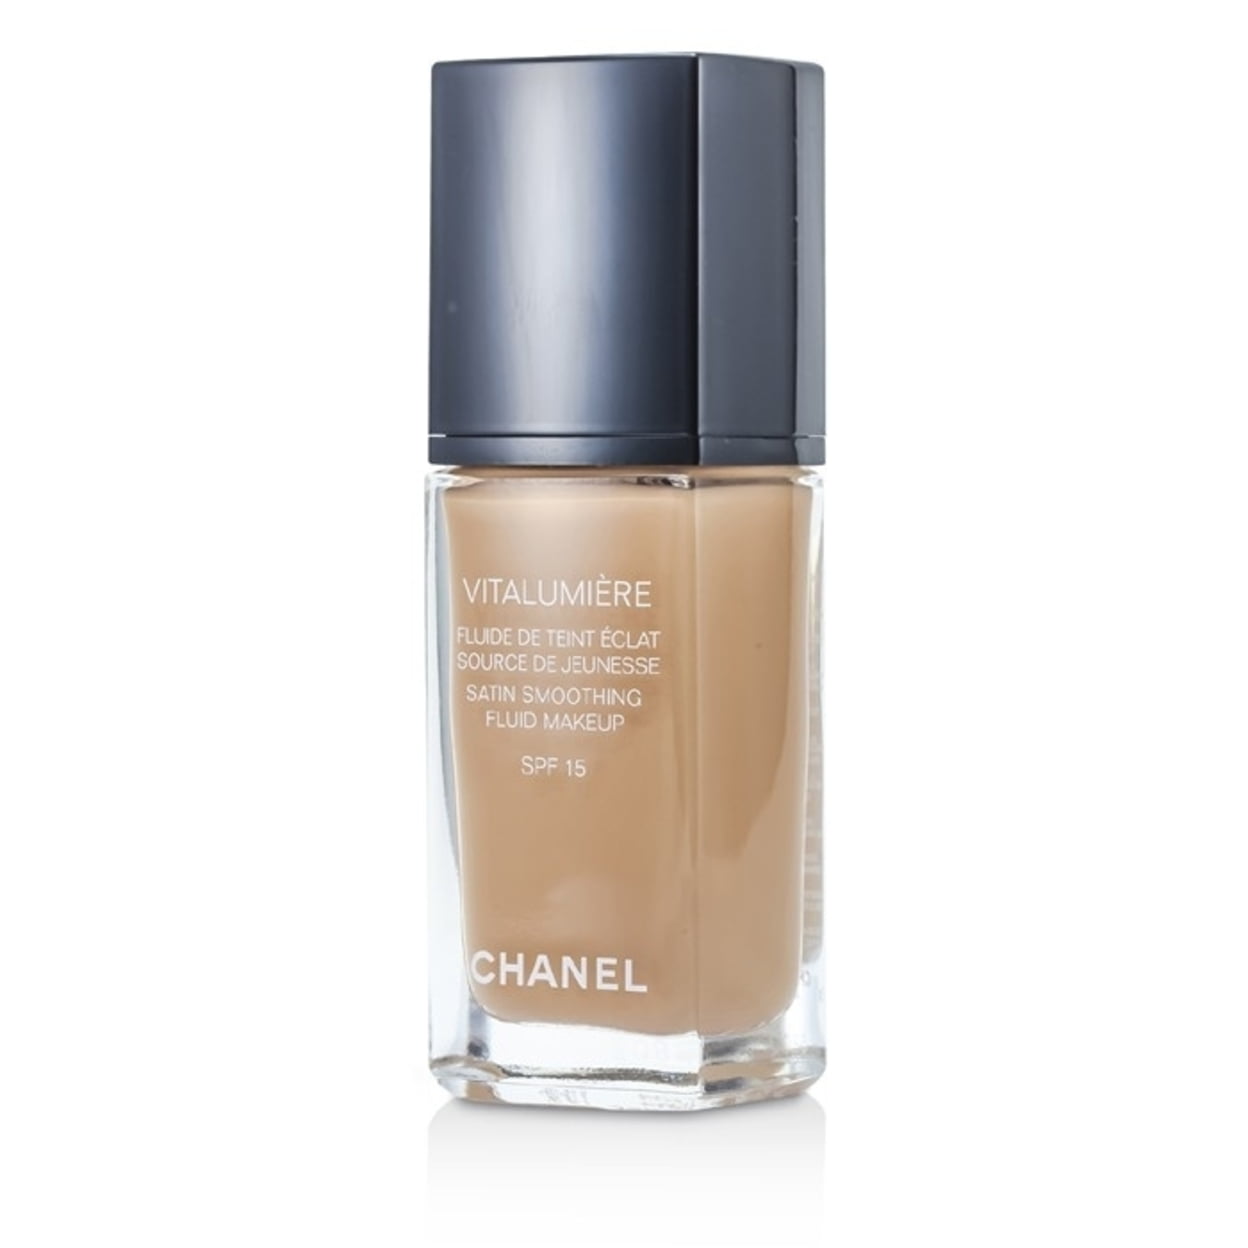 Vitalumiere Satin Smoothing Fluid Makeup SPF 15 - 40 Beige by Chanel for  Women - 1 oz Foundation 